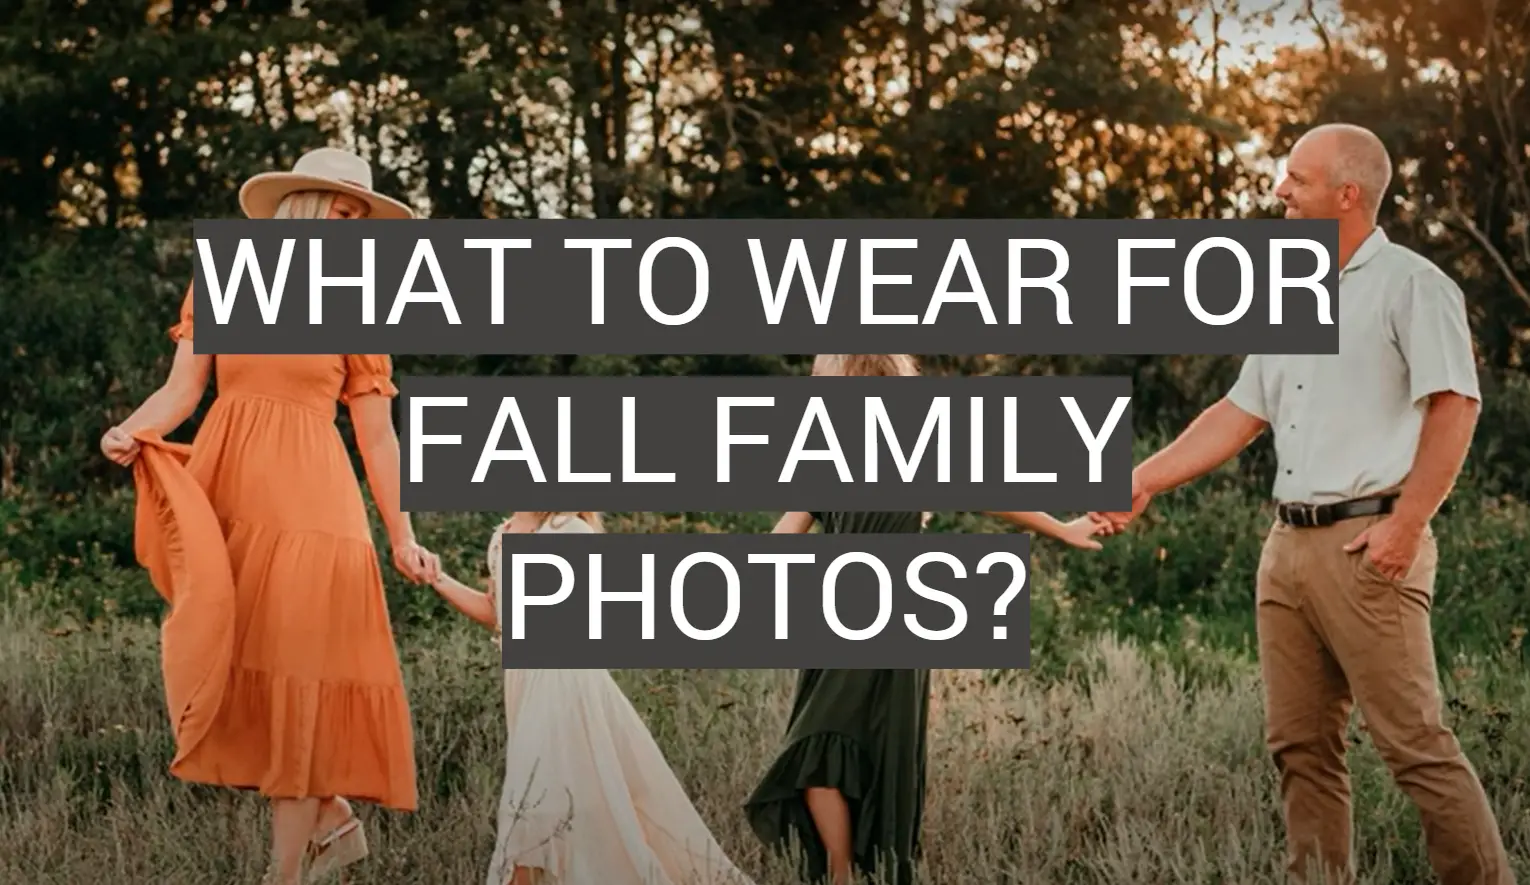 What to Wear for Fall Family Photos?